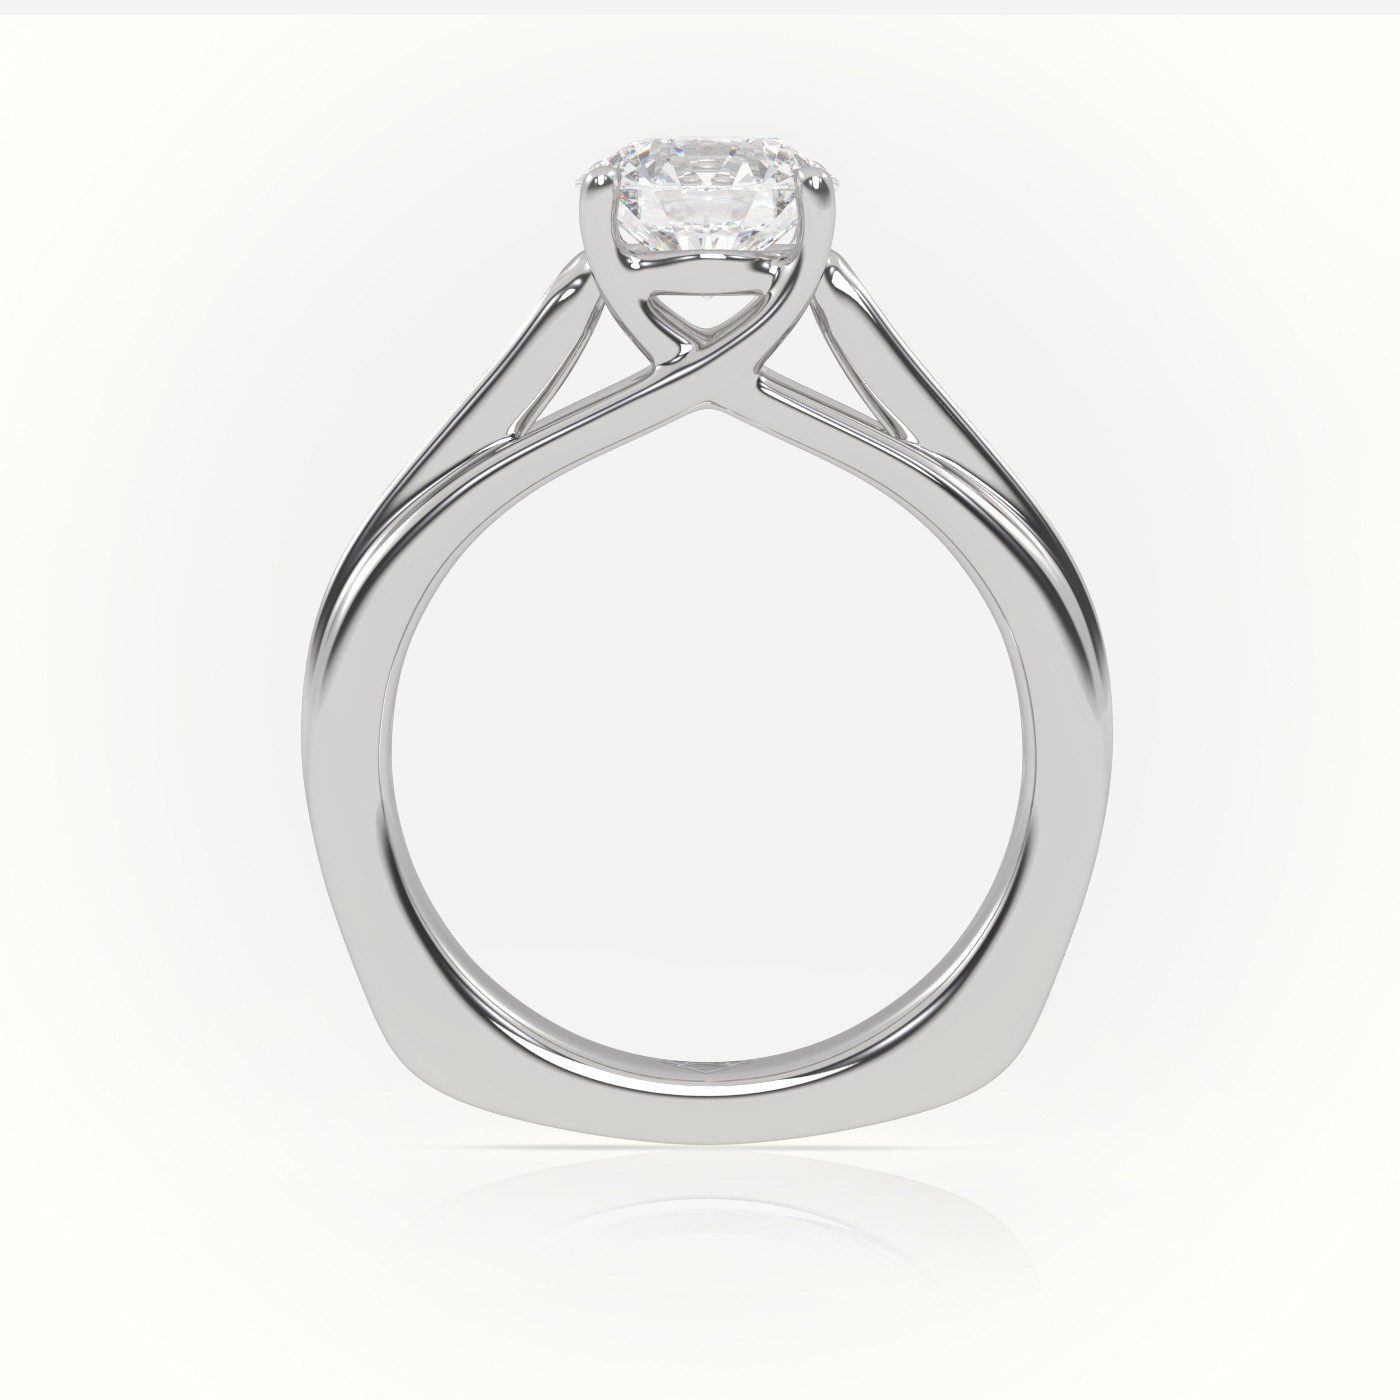 18K WHITE GOLD ROUND CUT DIAMOND CHANNEL SETTING ENGAGEMENT RING